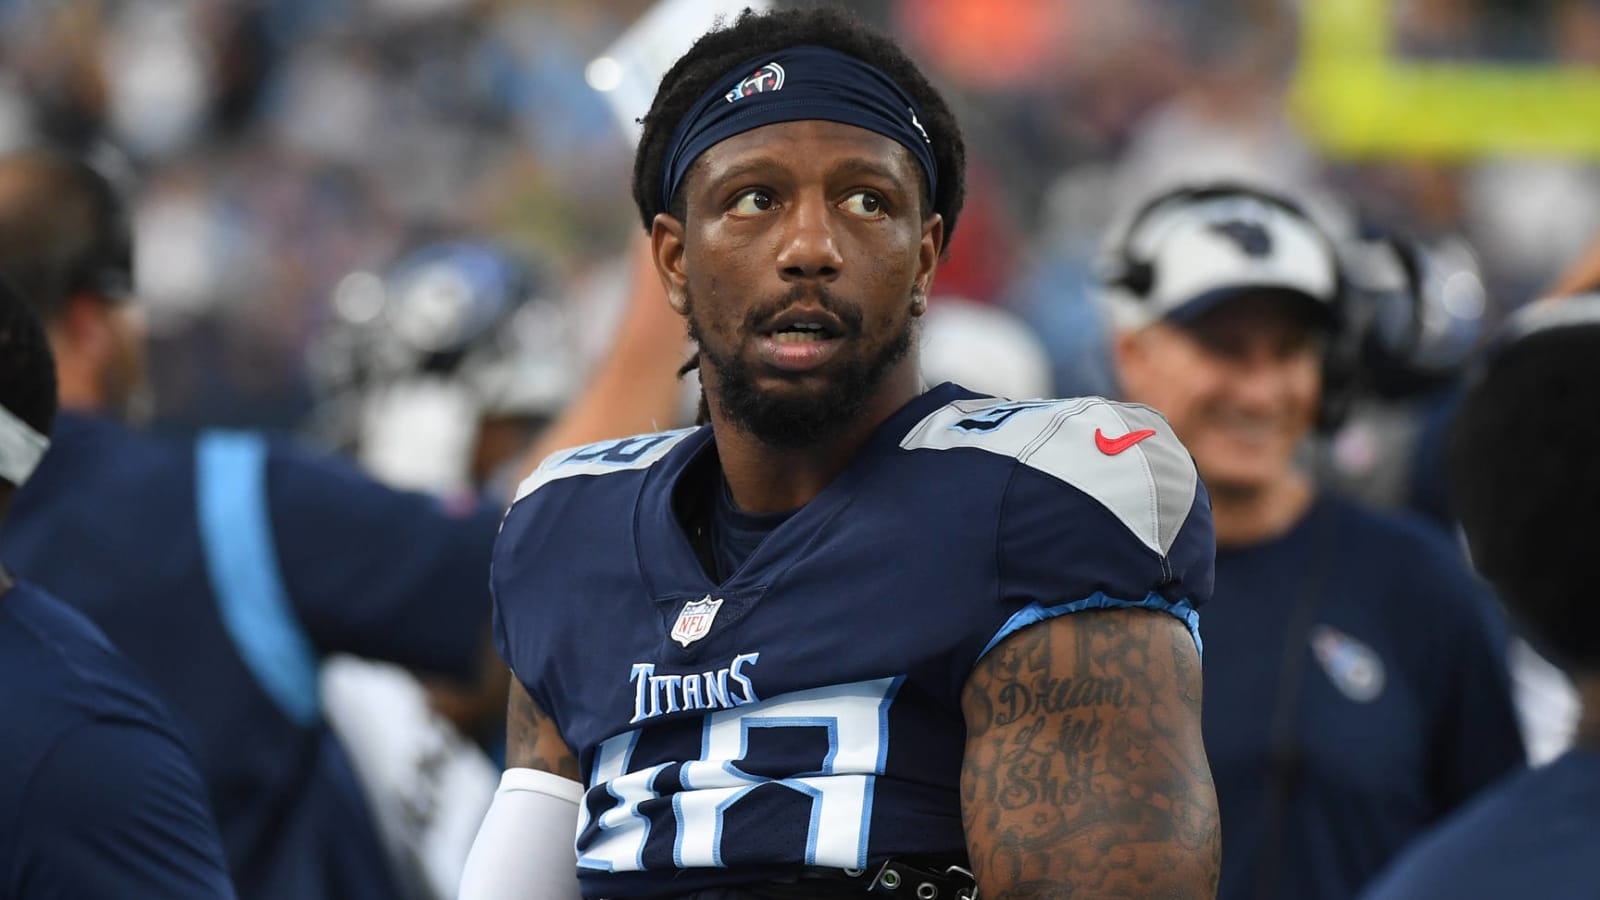 Titans' Bud Dupree charged with misdemeanor assault